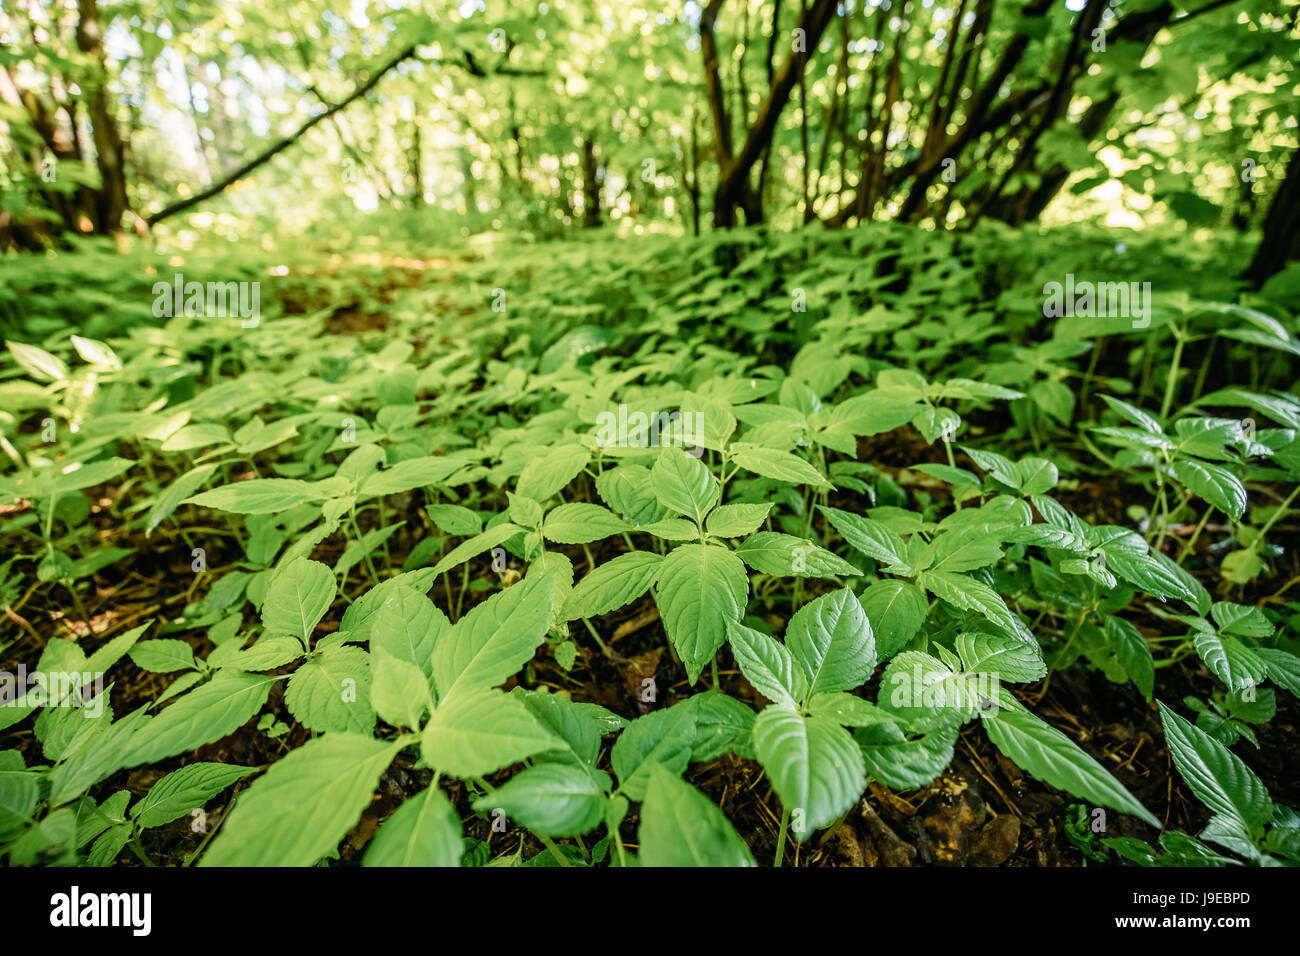 Wild Bushy Thickets Of Small-Flowered Touch-Me-Not Or Impatiens Parviflora Plant In Summer Greenwood. Trees Background. Stock Photo